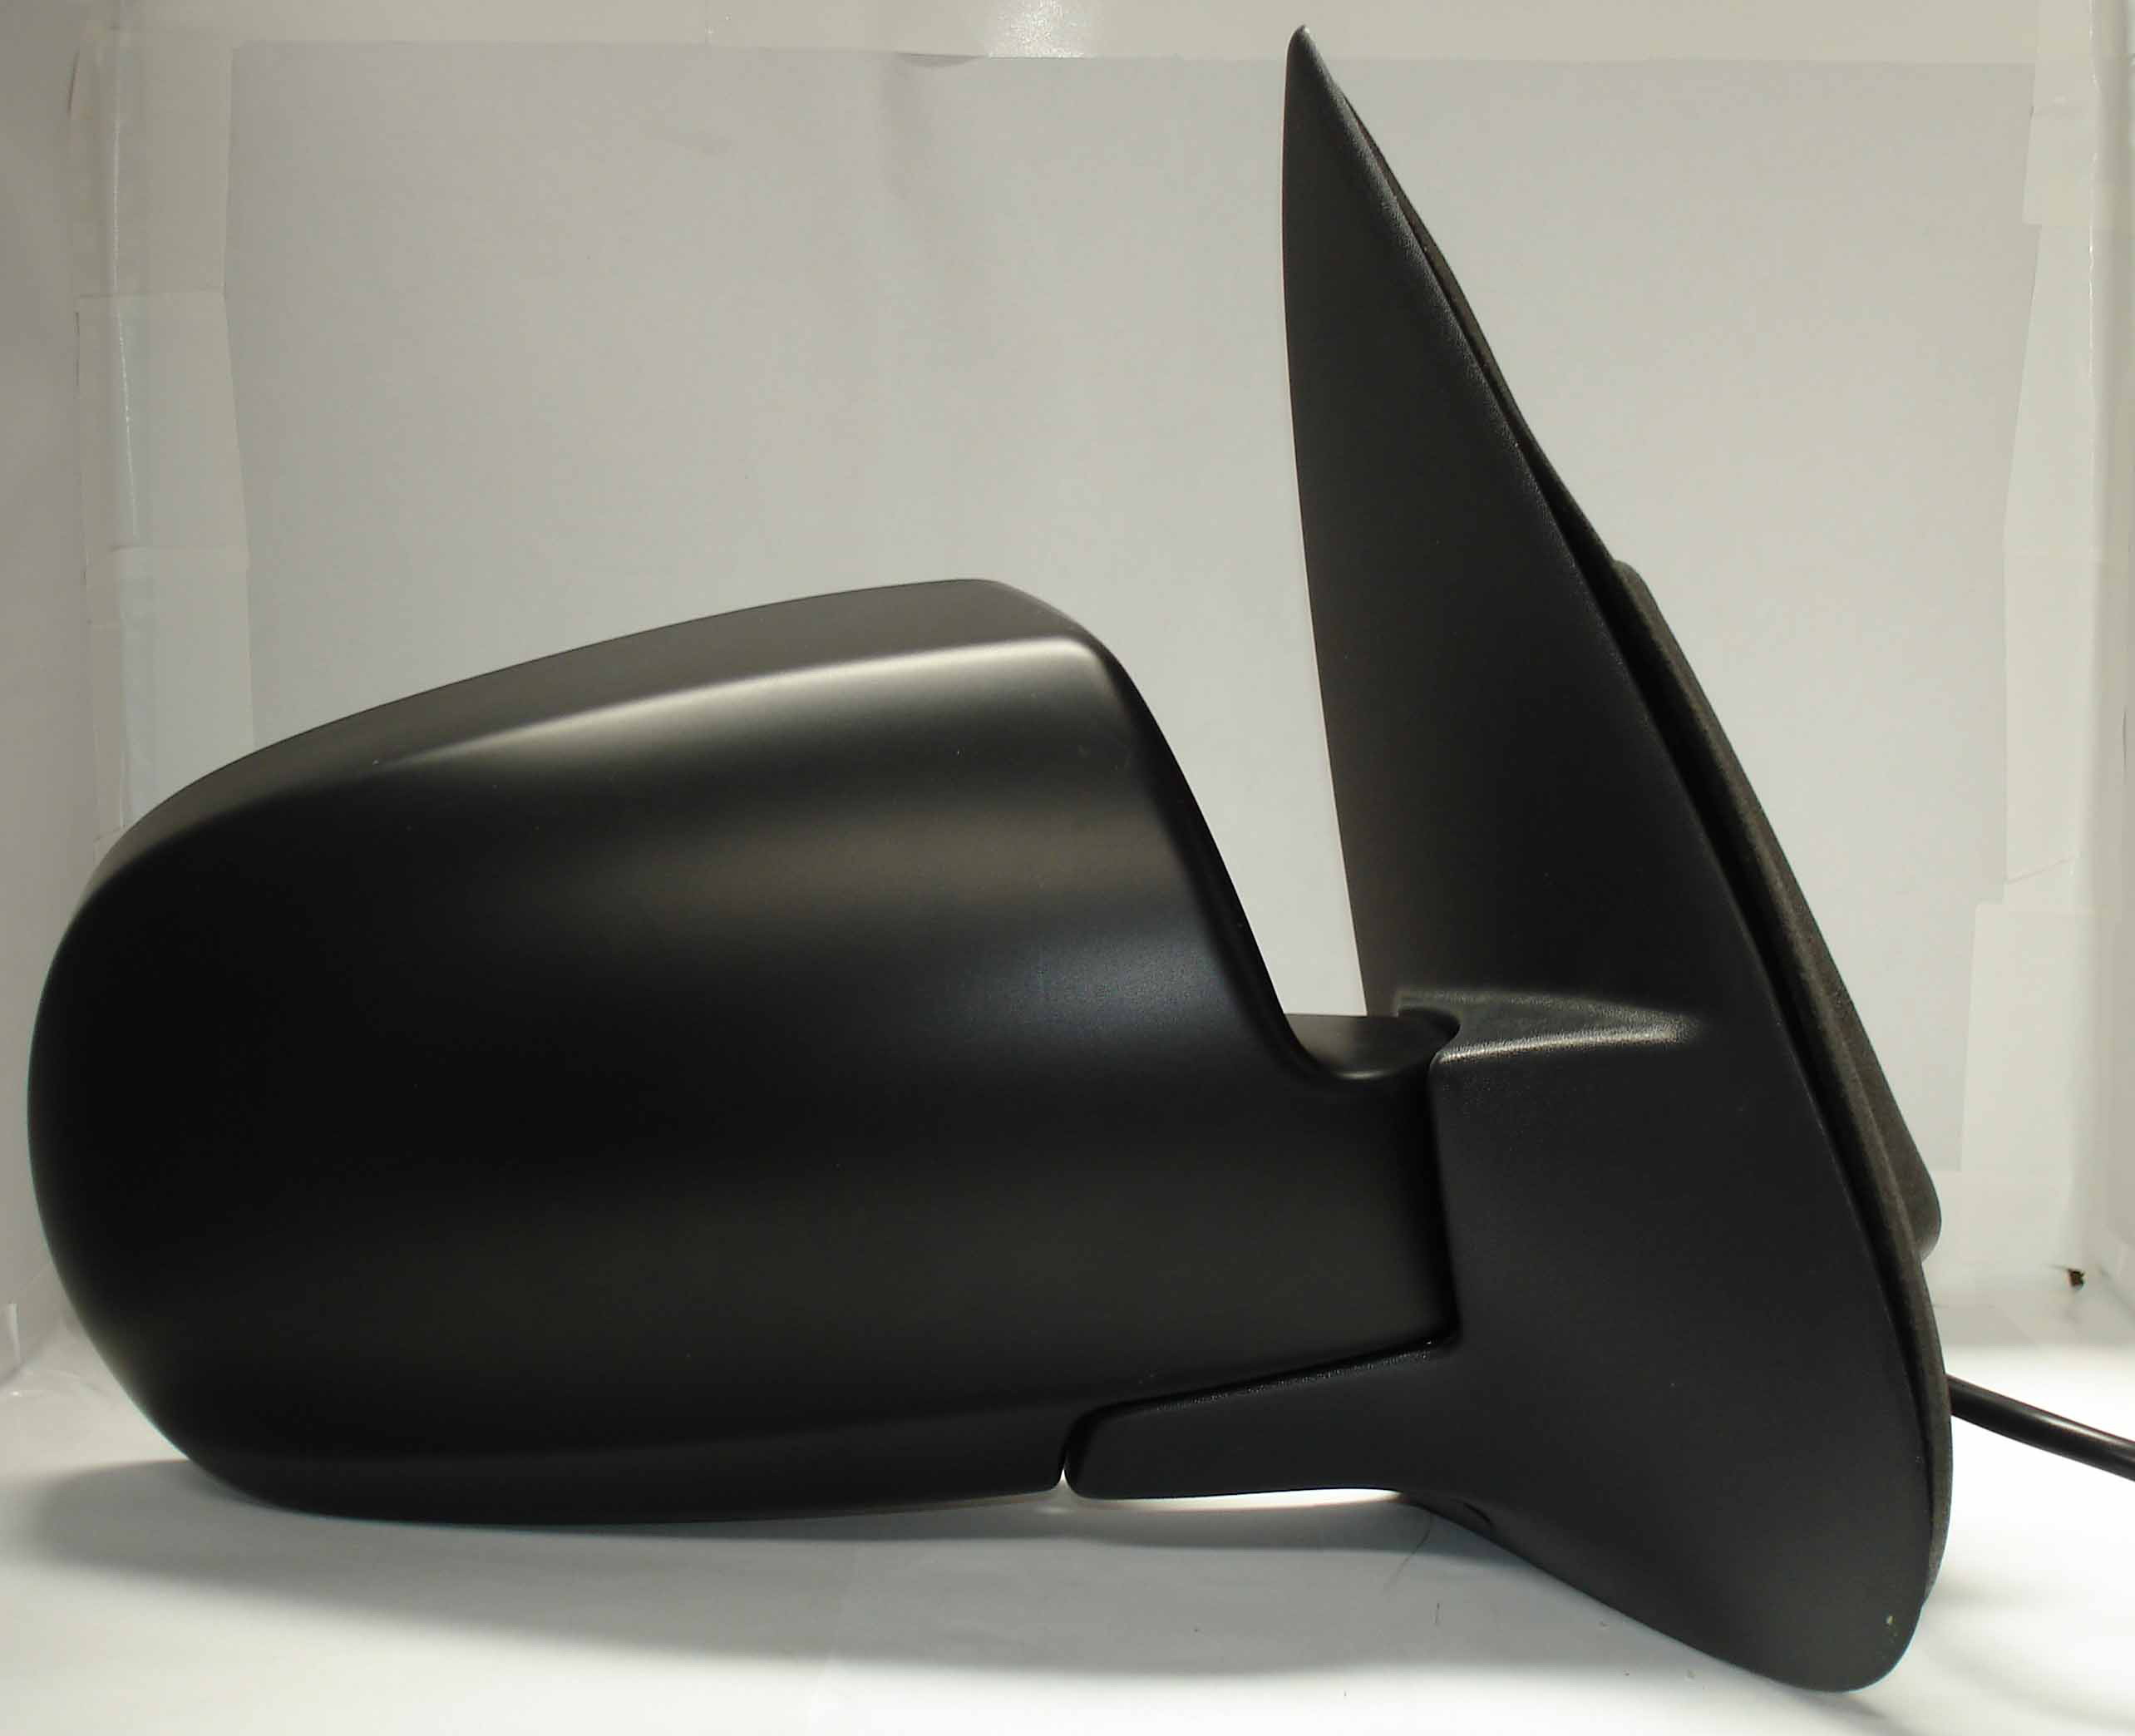 Aftermarket MIRRORS for MAZDA - TRIBUTE, TRIBUTE,05-06,RT Mirror outside rear view